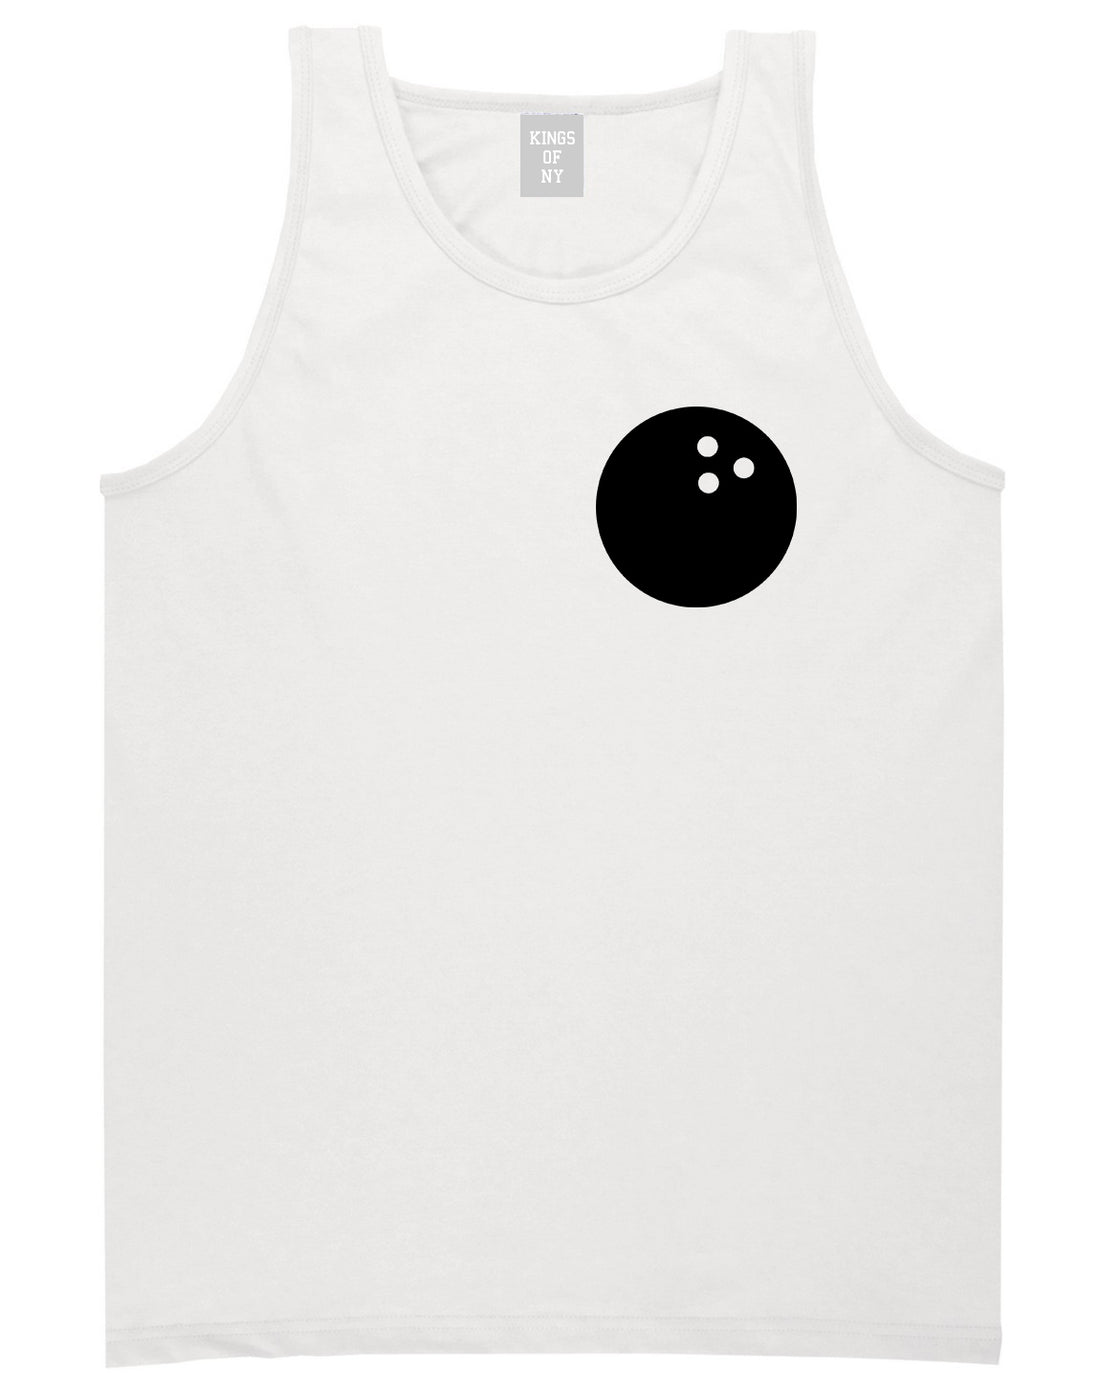 Bowling Ball Chest White Tank Top Shirt by Kings Of NY